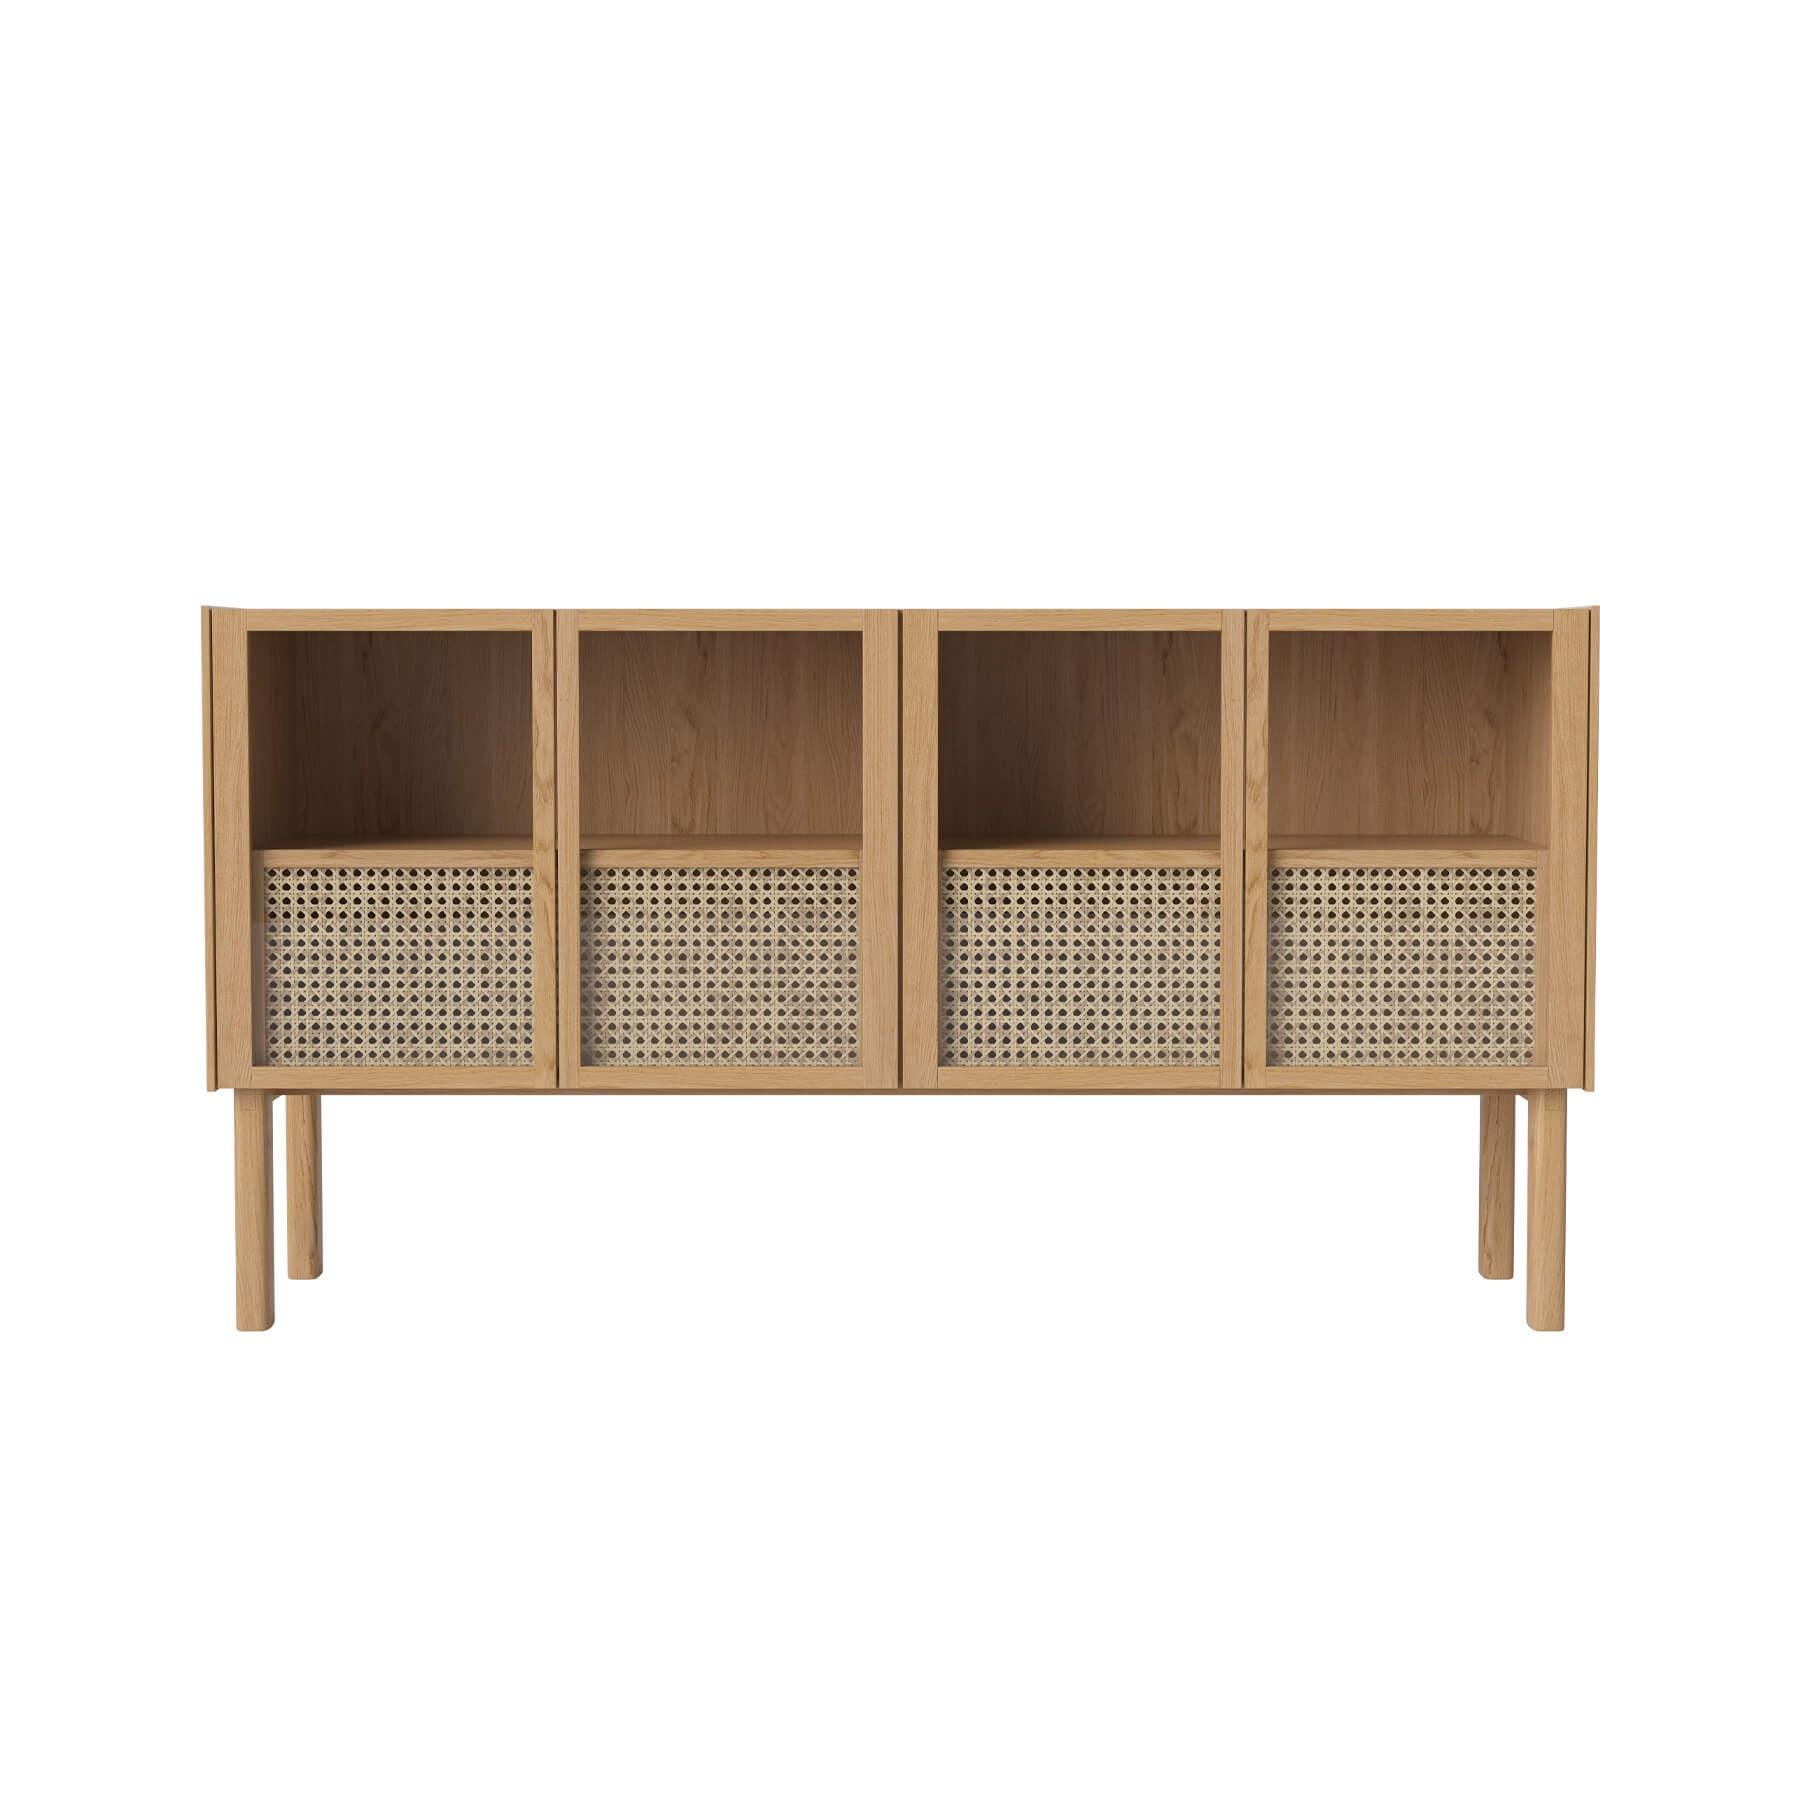 Bolia Cana Sideboard Oiled Oak Light Wood Designer Furniture From Holloways Of Ludlow